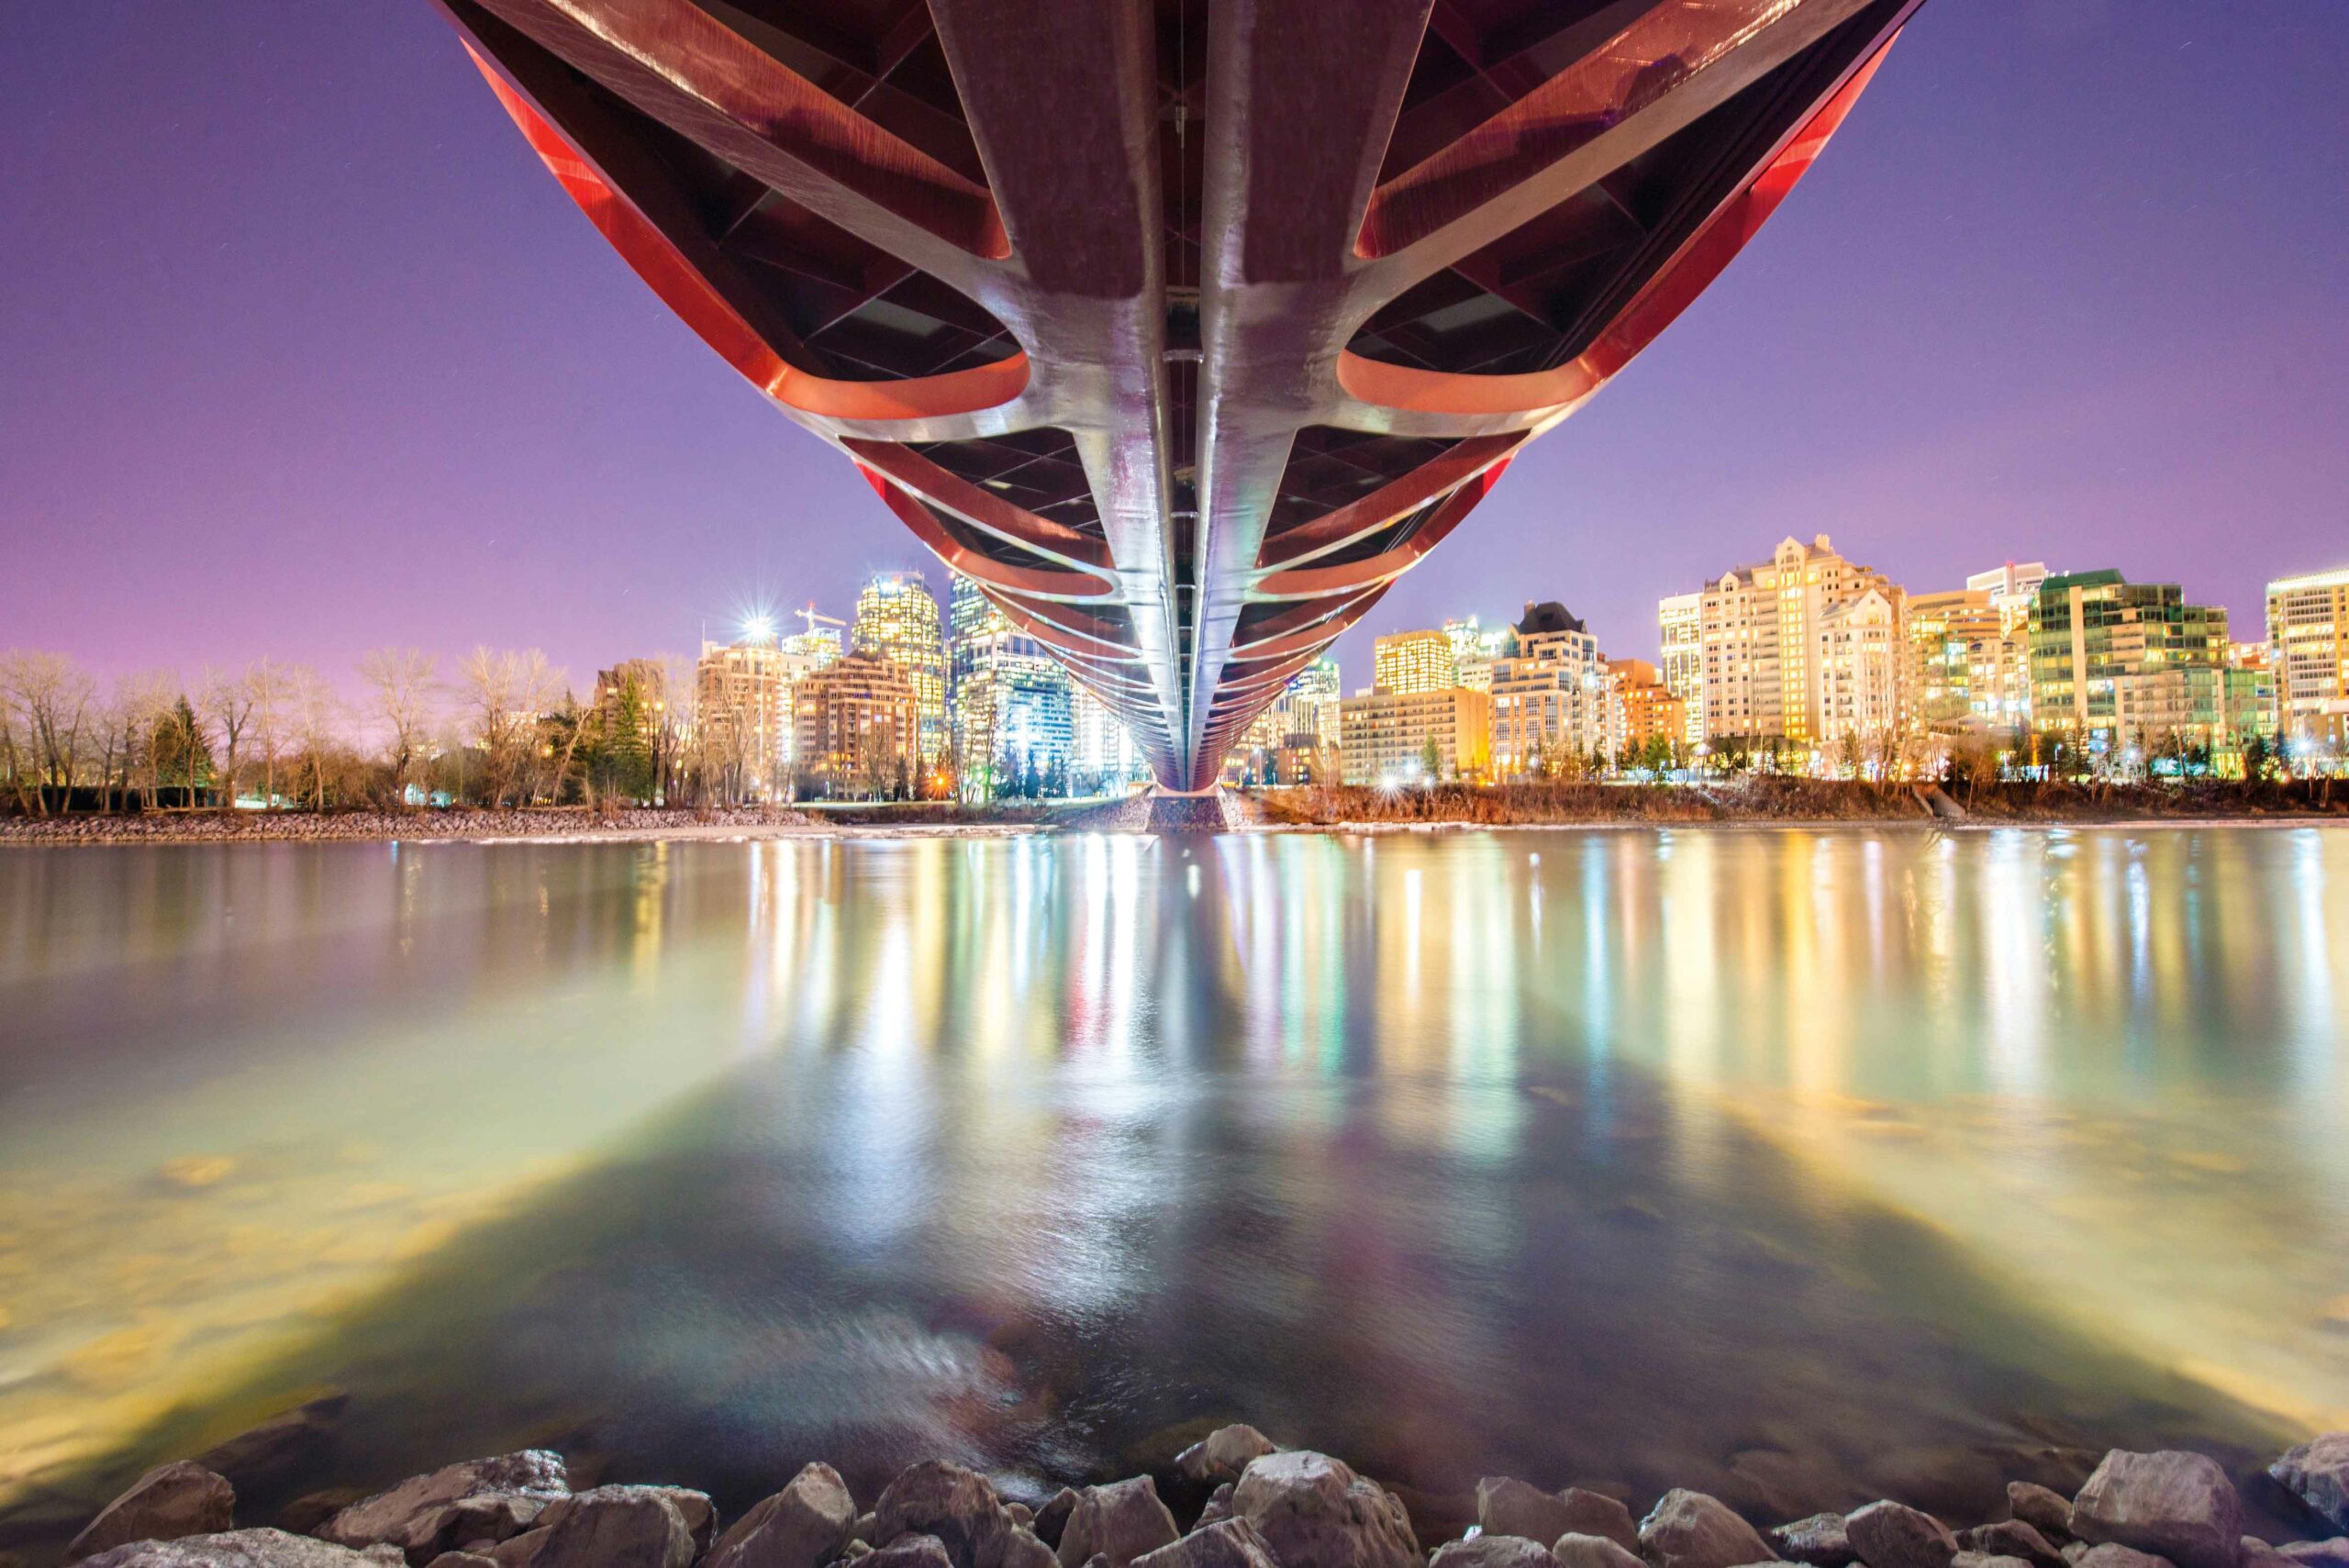 A nighttime shot of the Peace Bridge from underneath the bridge. This is a unique angle for this popular photo op in the city.